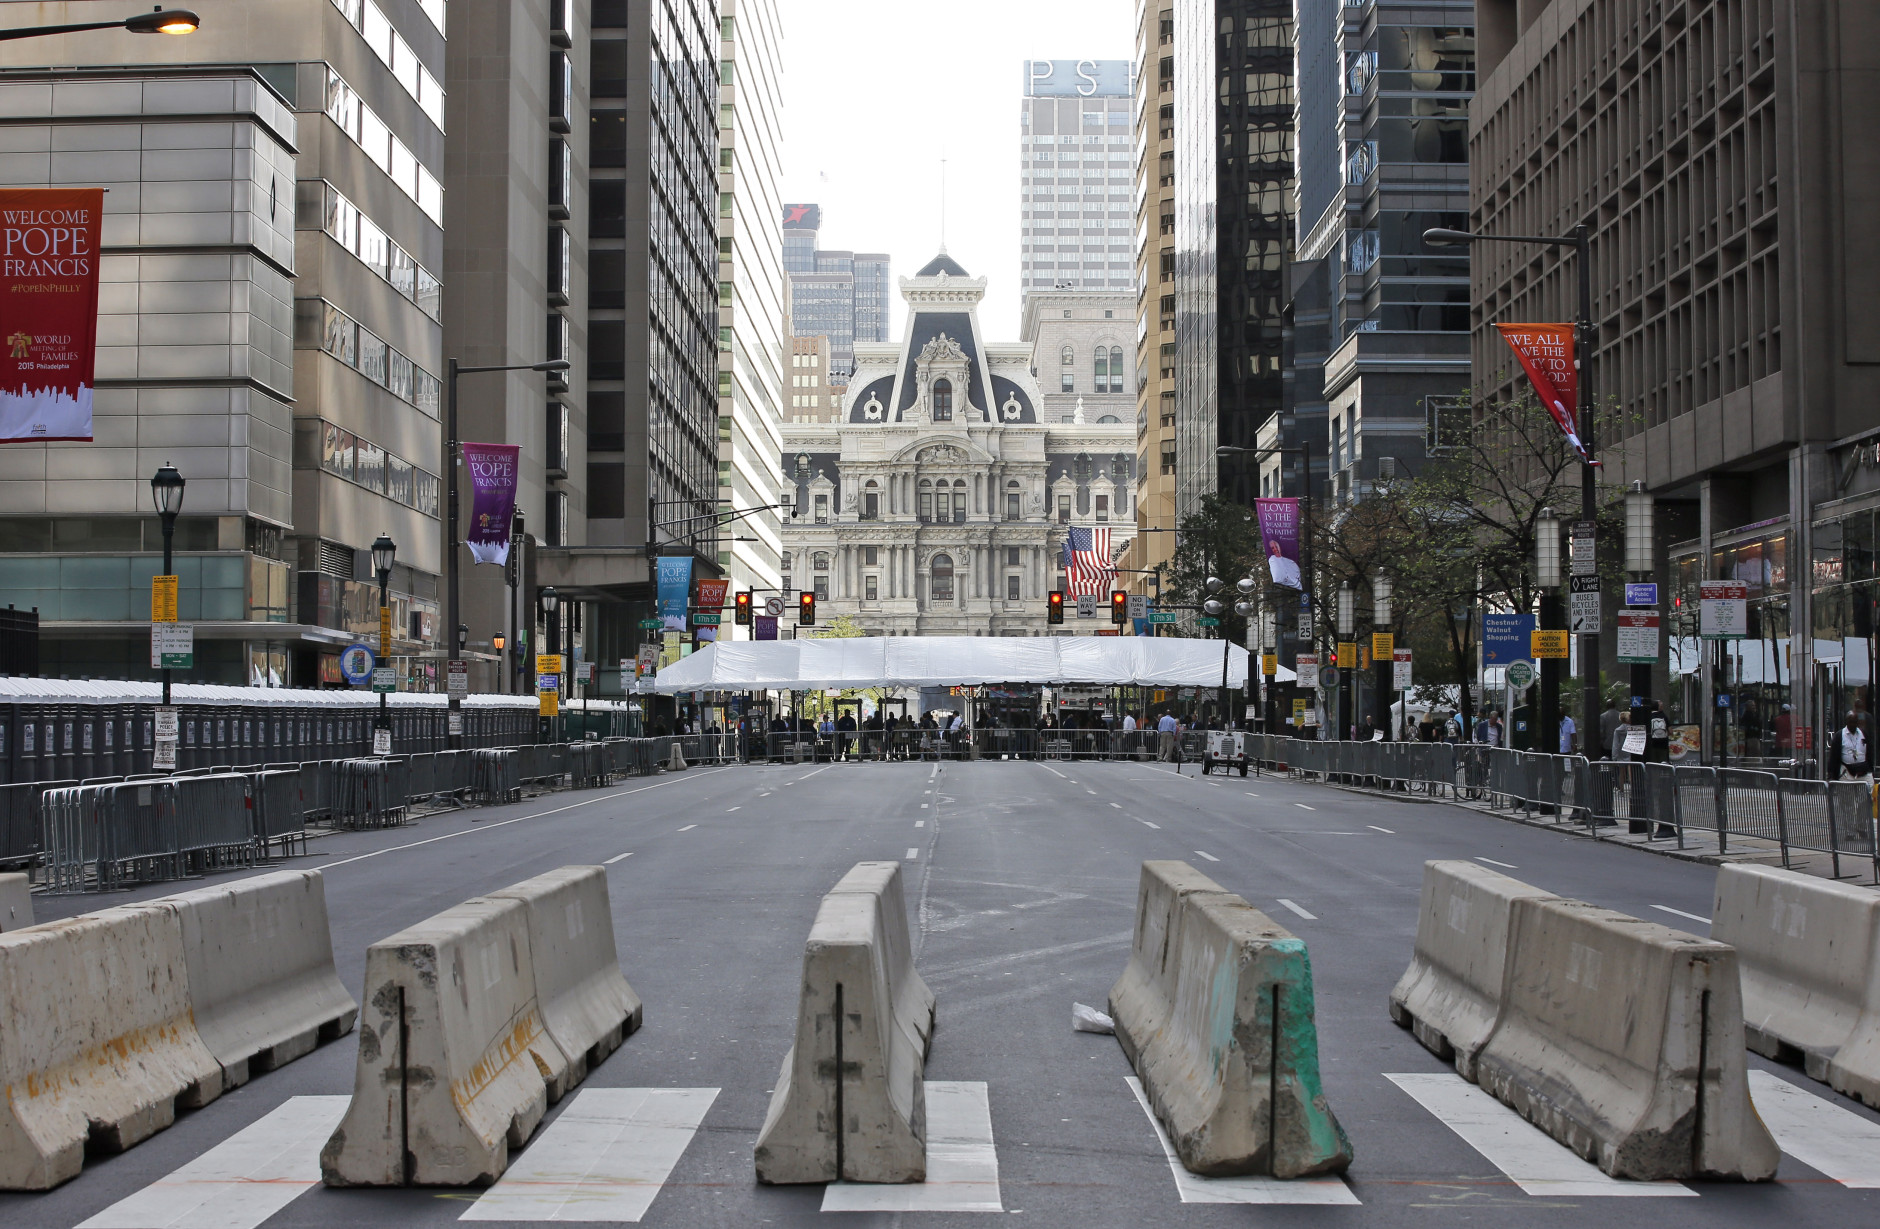 A security checkpoint is set up in the middle of Market Street in Philadelphia on Friday, Sept. 25, 2015 before Pope Francis' upcoming visit. (AP Photo/Alex Brandon)